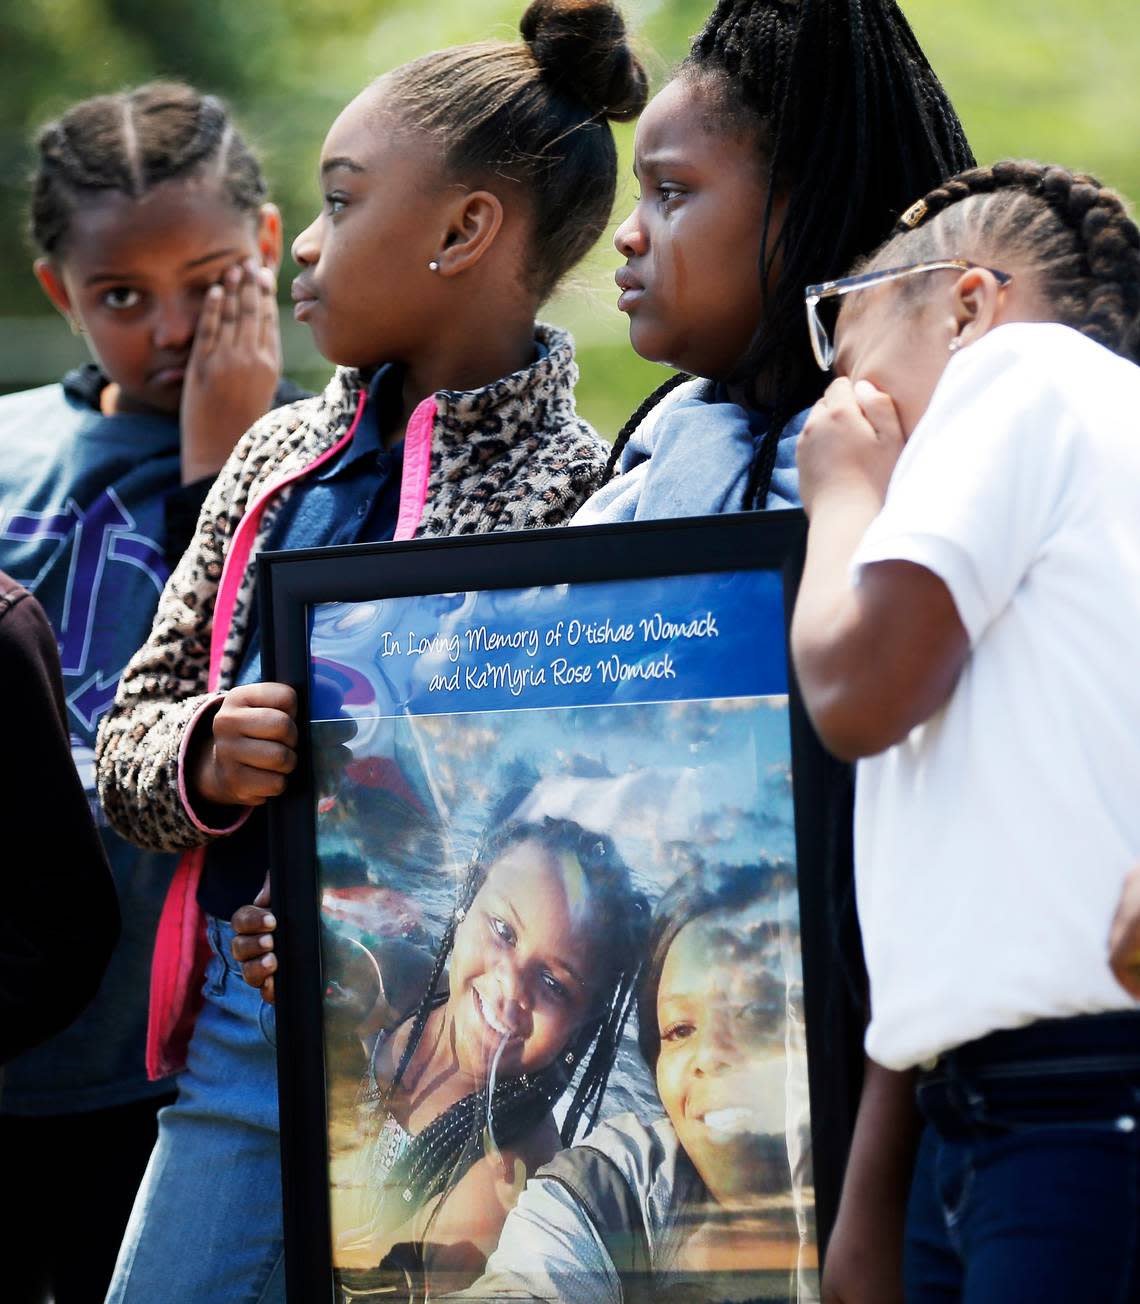 (Starting second from left) Fourth-graders Marlya Dents, 10, Jade Fox, 9, and Ramya Sayles, 9, mourn their friend and classmate Ka’myria Rose Womack and her mother, O’Tishae Womack, both victims of domestic violence, during a memorial at Morningside Elementary School in Fort Worth on April 20, 2018.